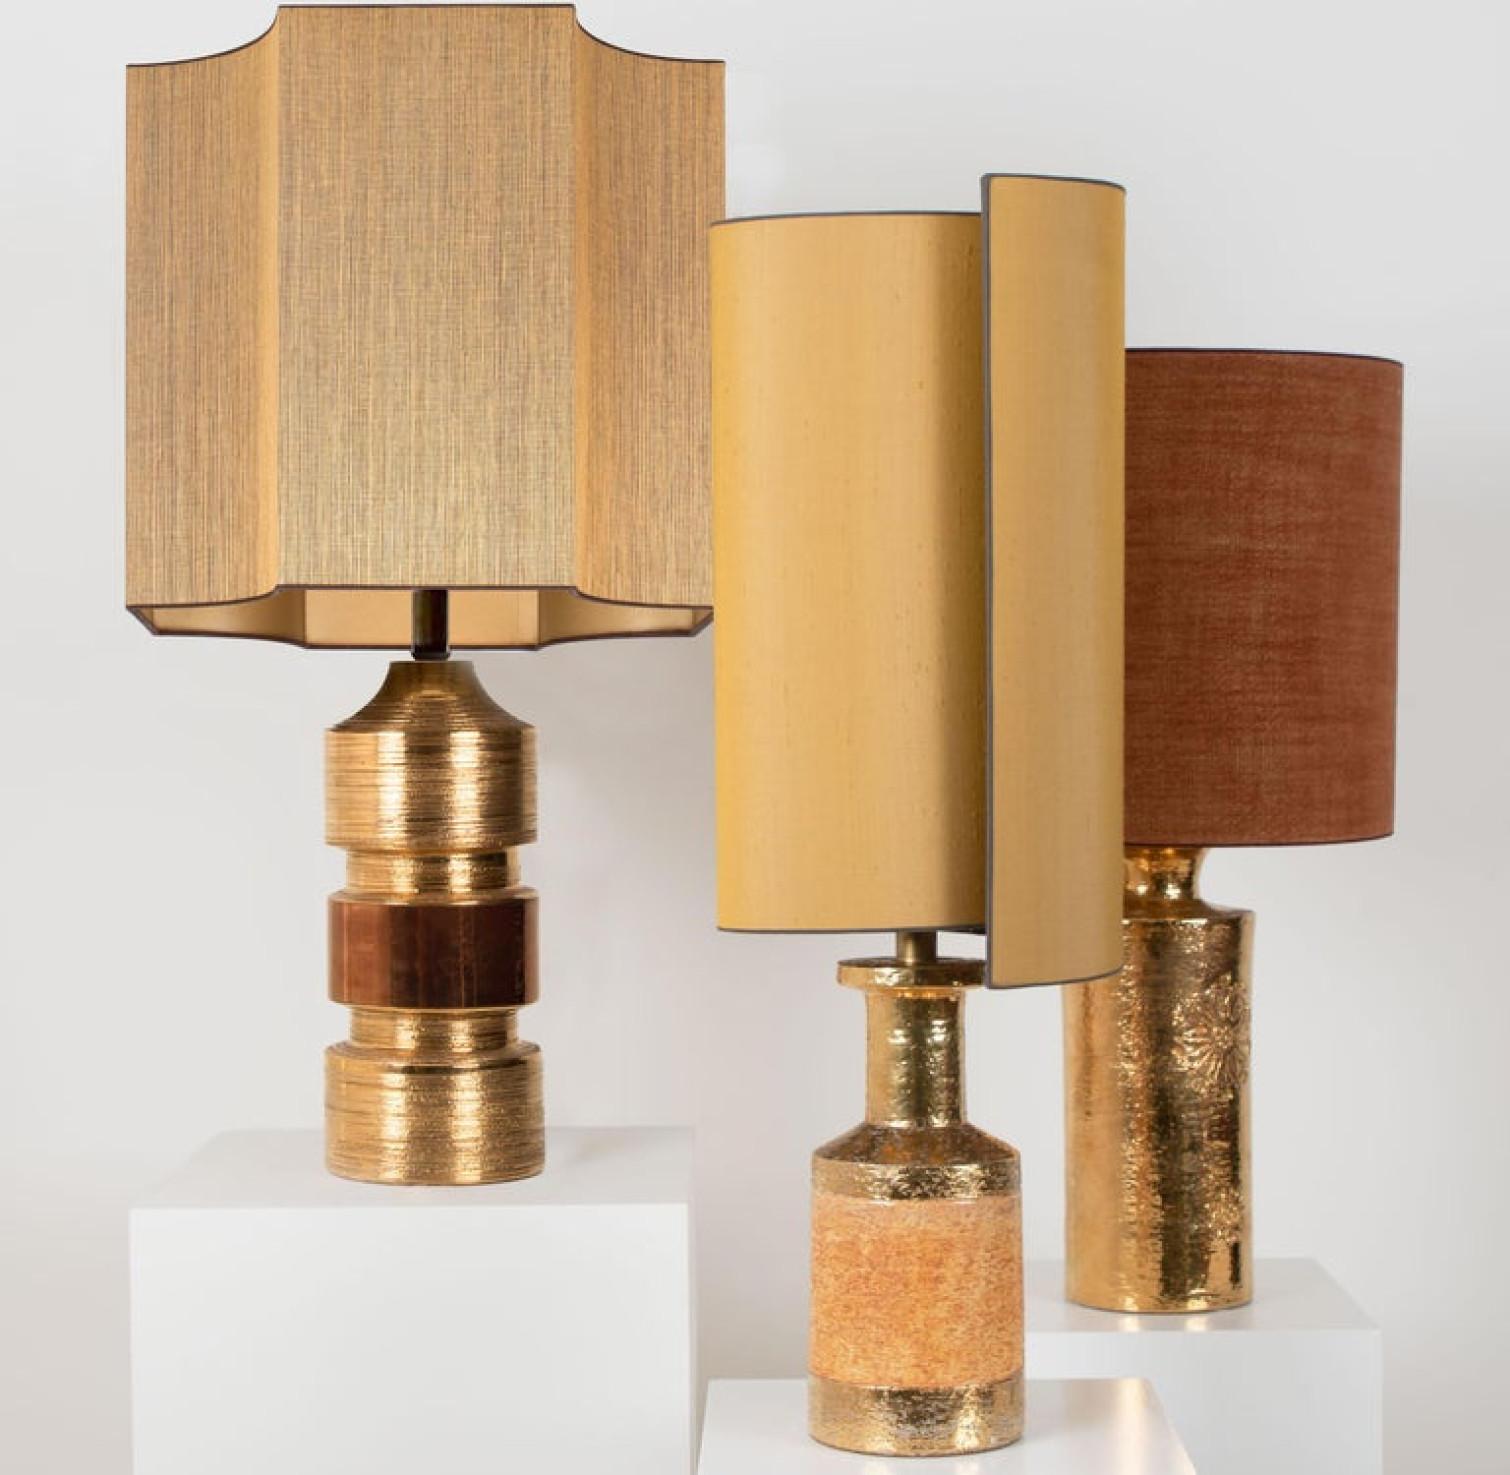 Pair of Bitossi Lamps for Bergboms, with Custom Made Silk Shades by Rene Houben For Sale 3